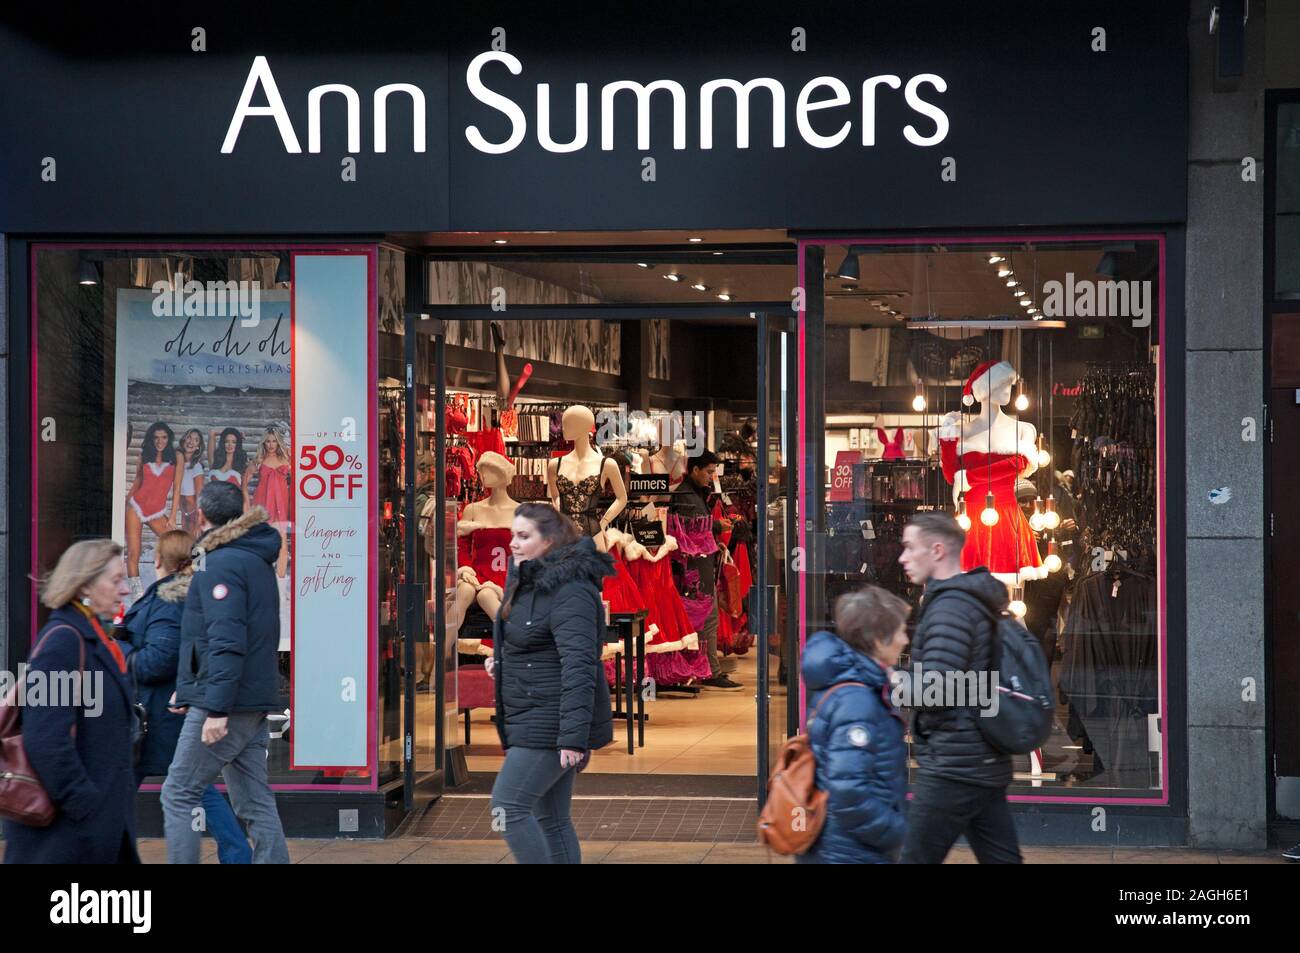 Ann Summers Shop High Resolution Stock Photography and Images - Alamy